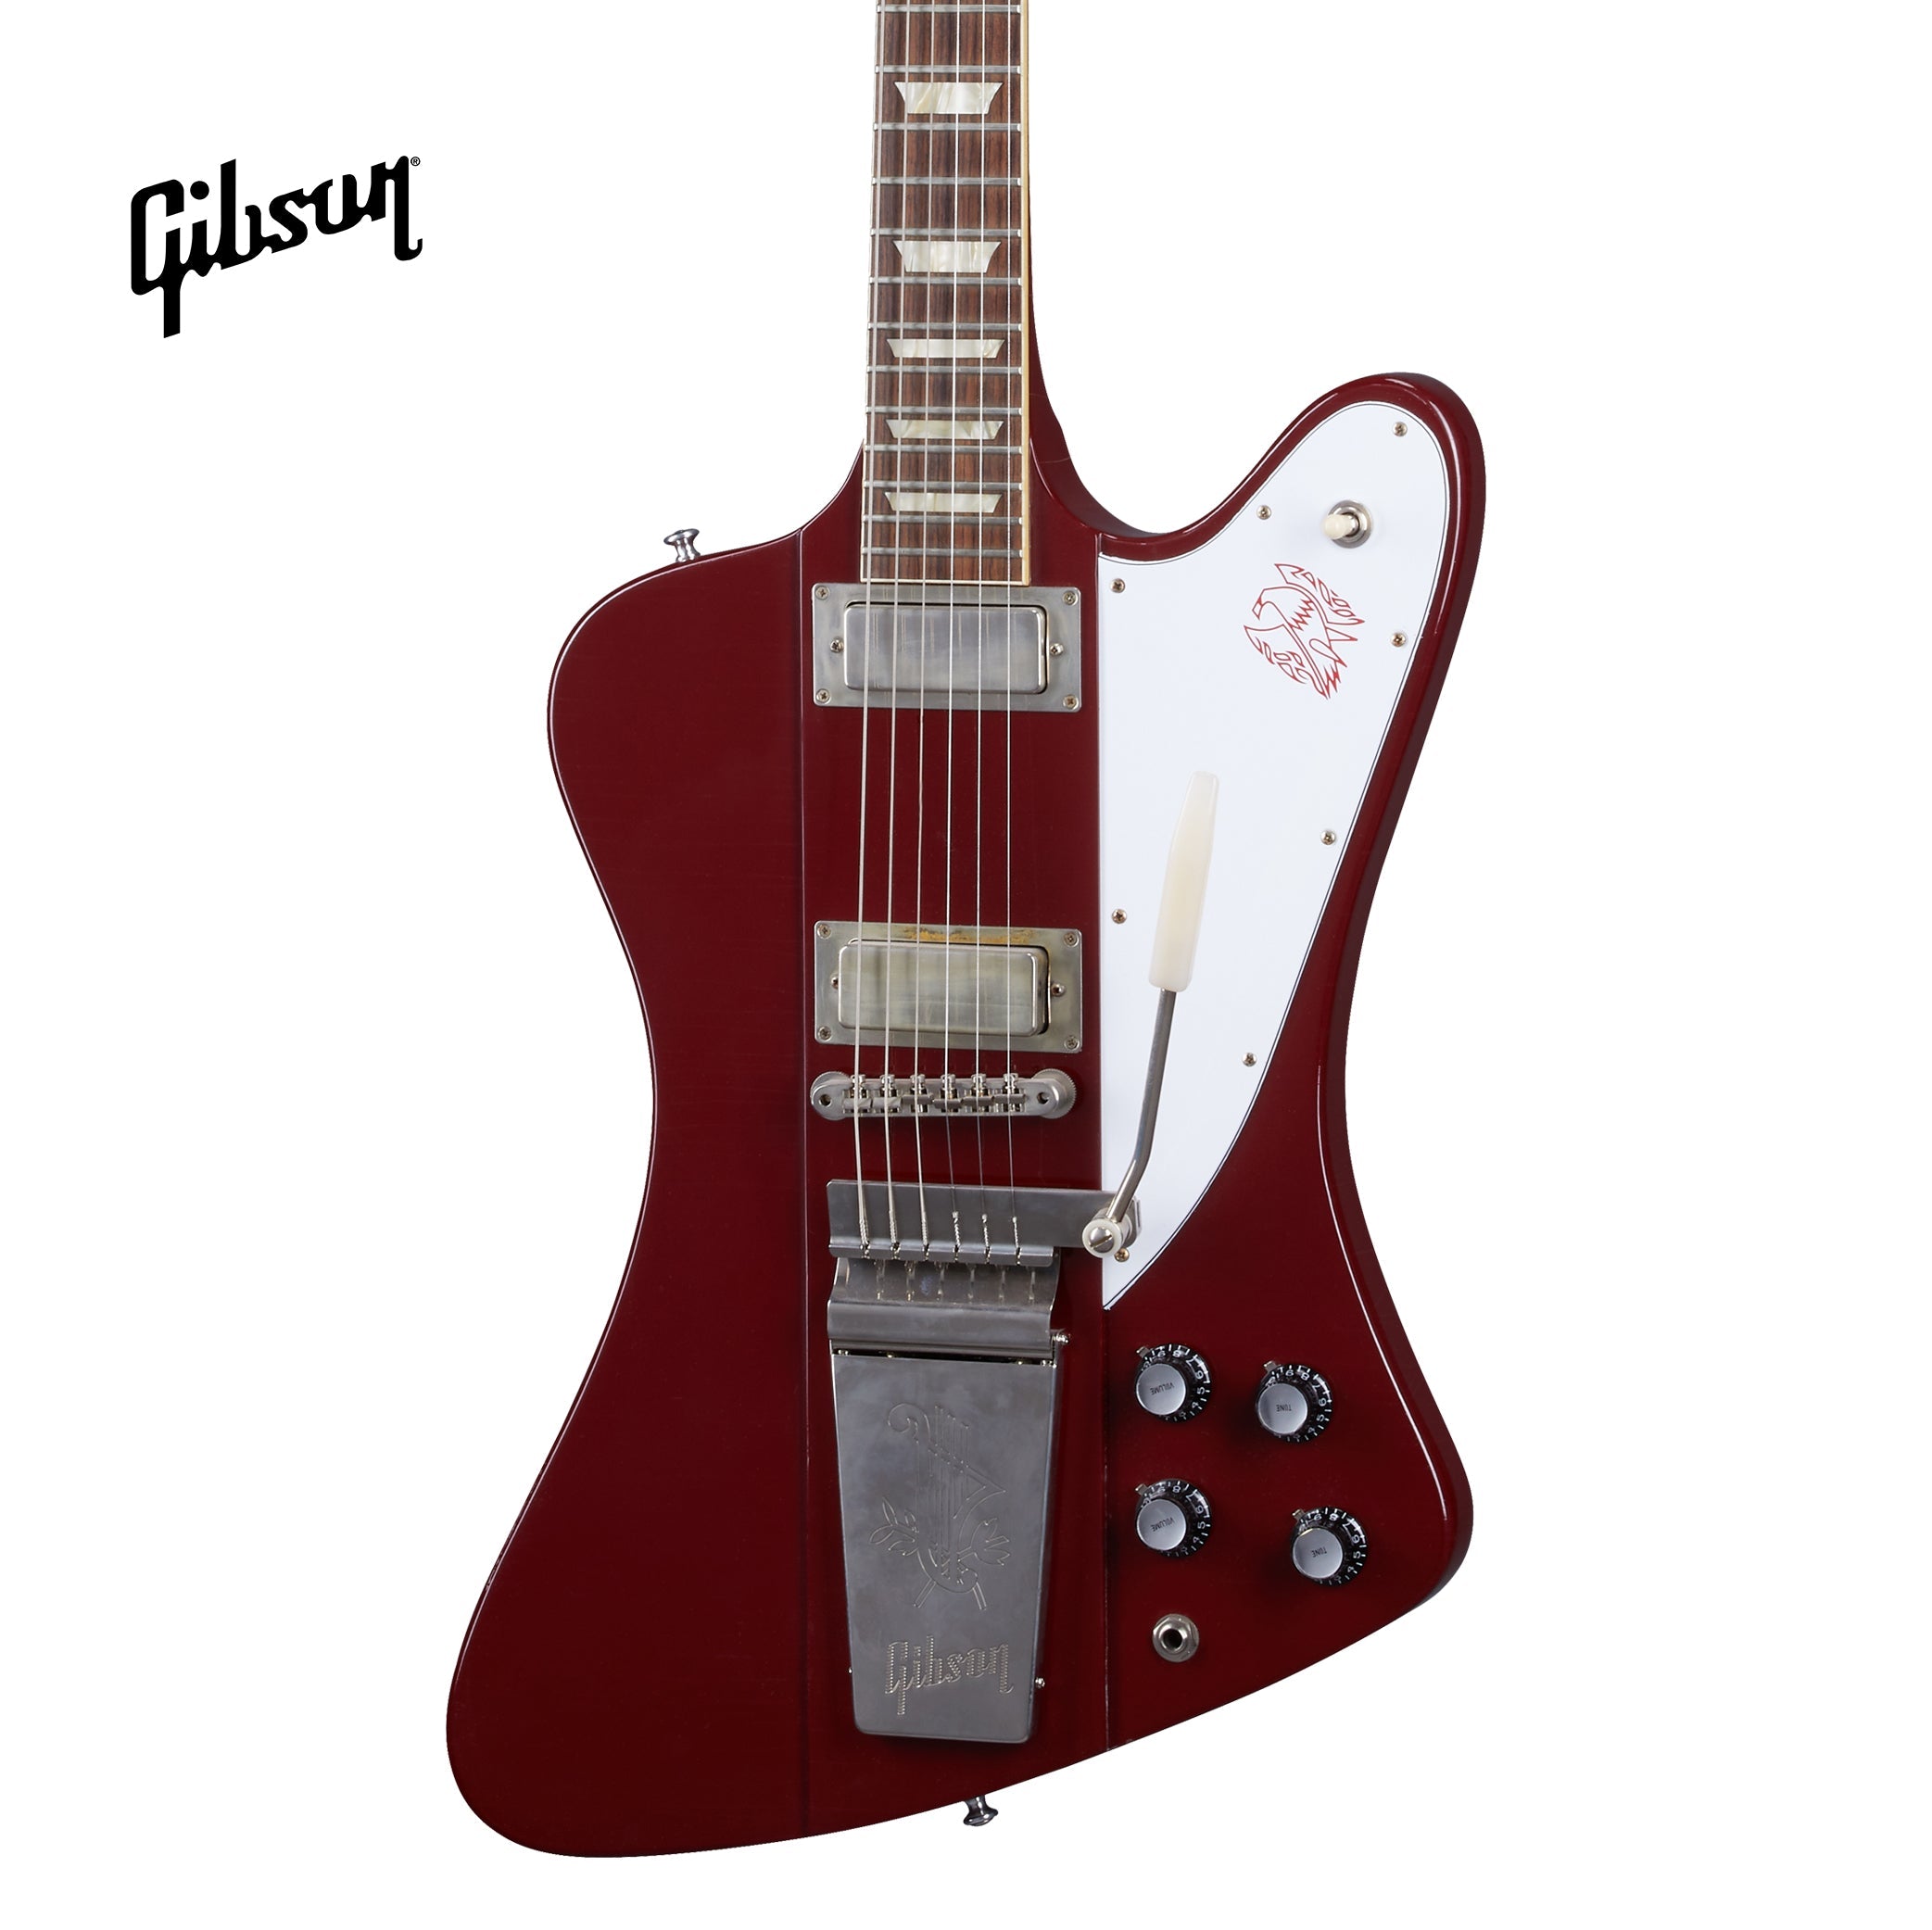 GIBSON 1963 FIREBIRD V WITH MAESTRO VIBROLA ULTRA LIGHT AGED ELECTRIC GUITAR - EMBER RED